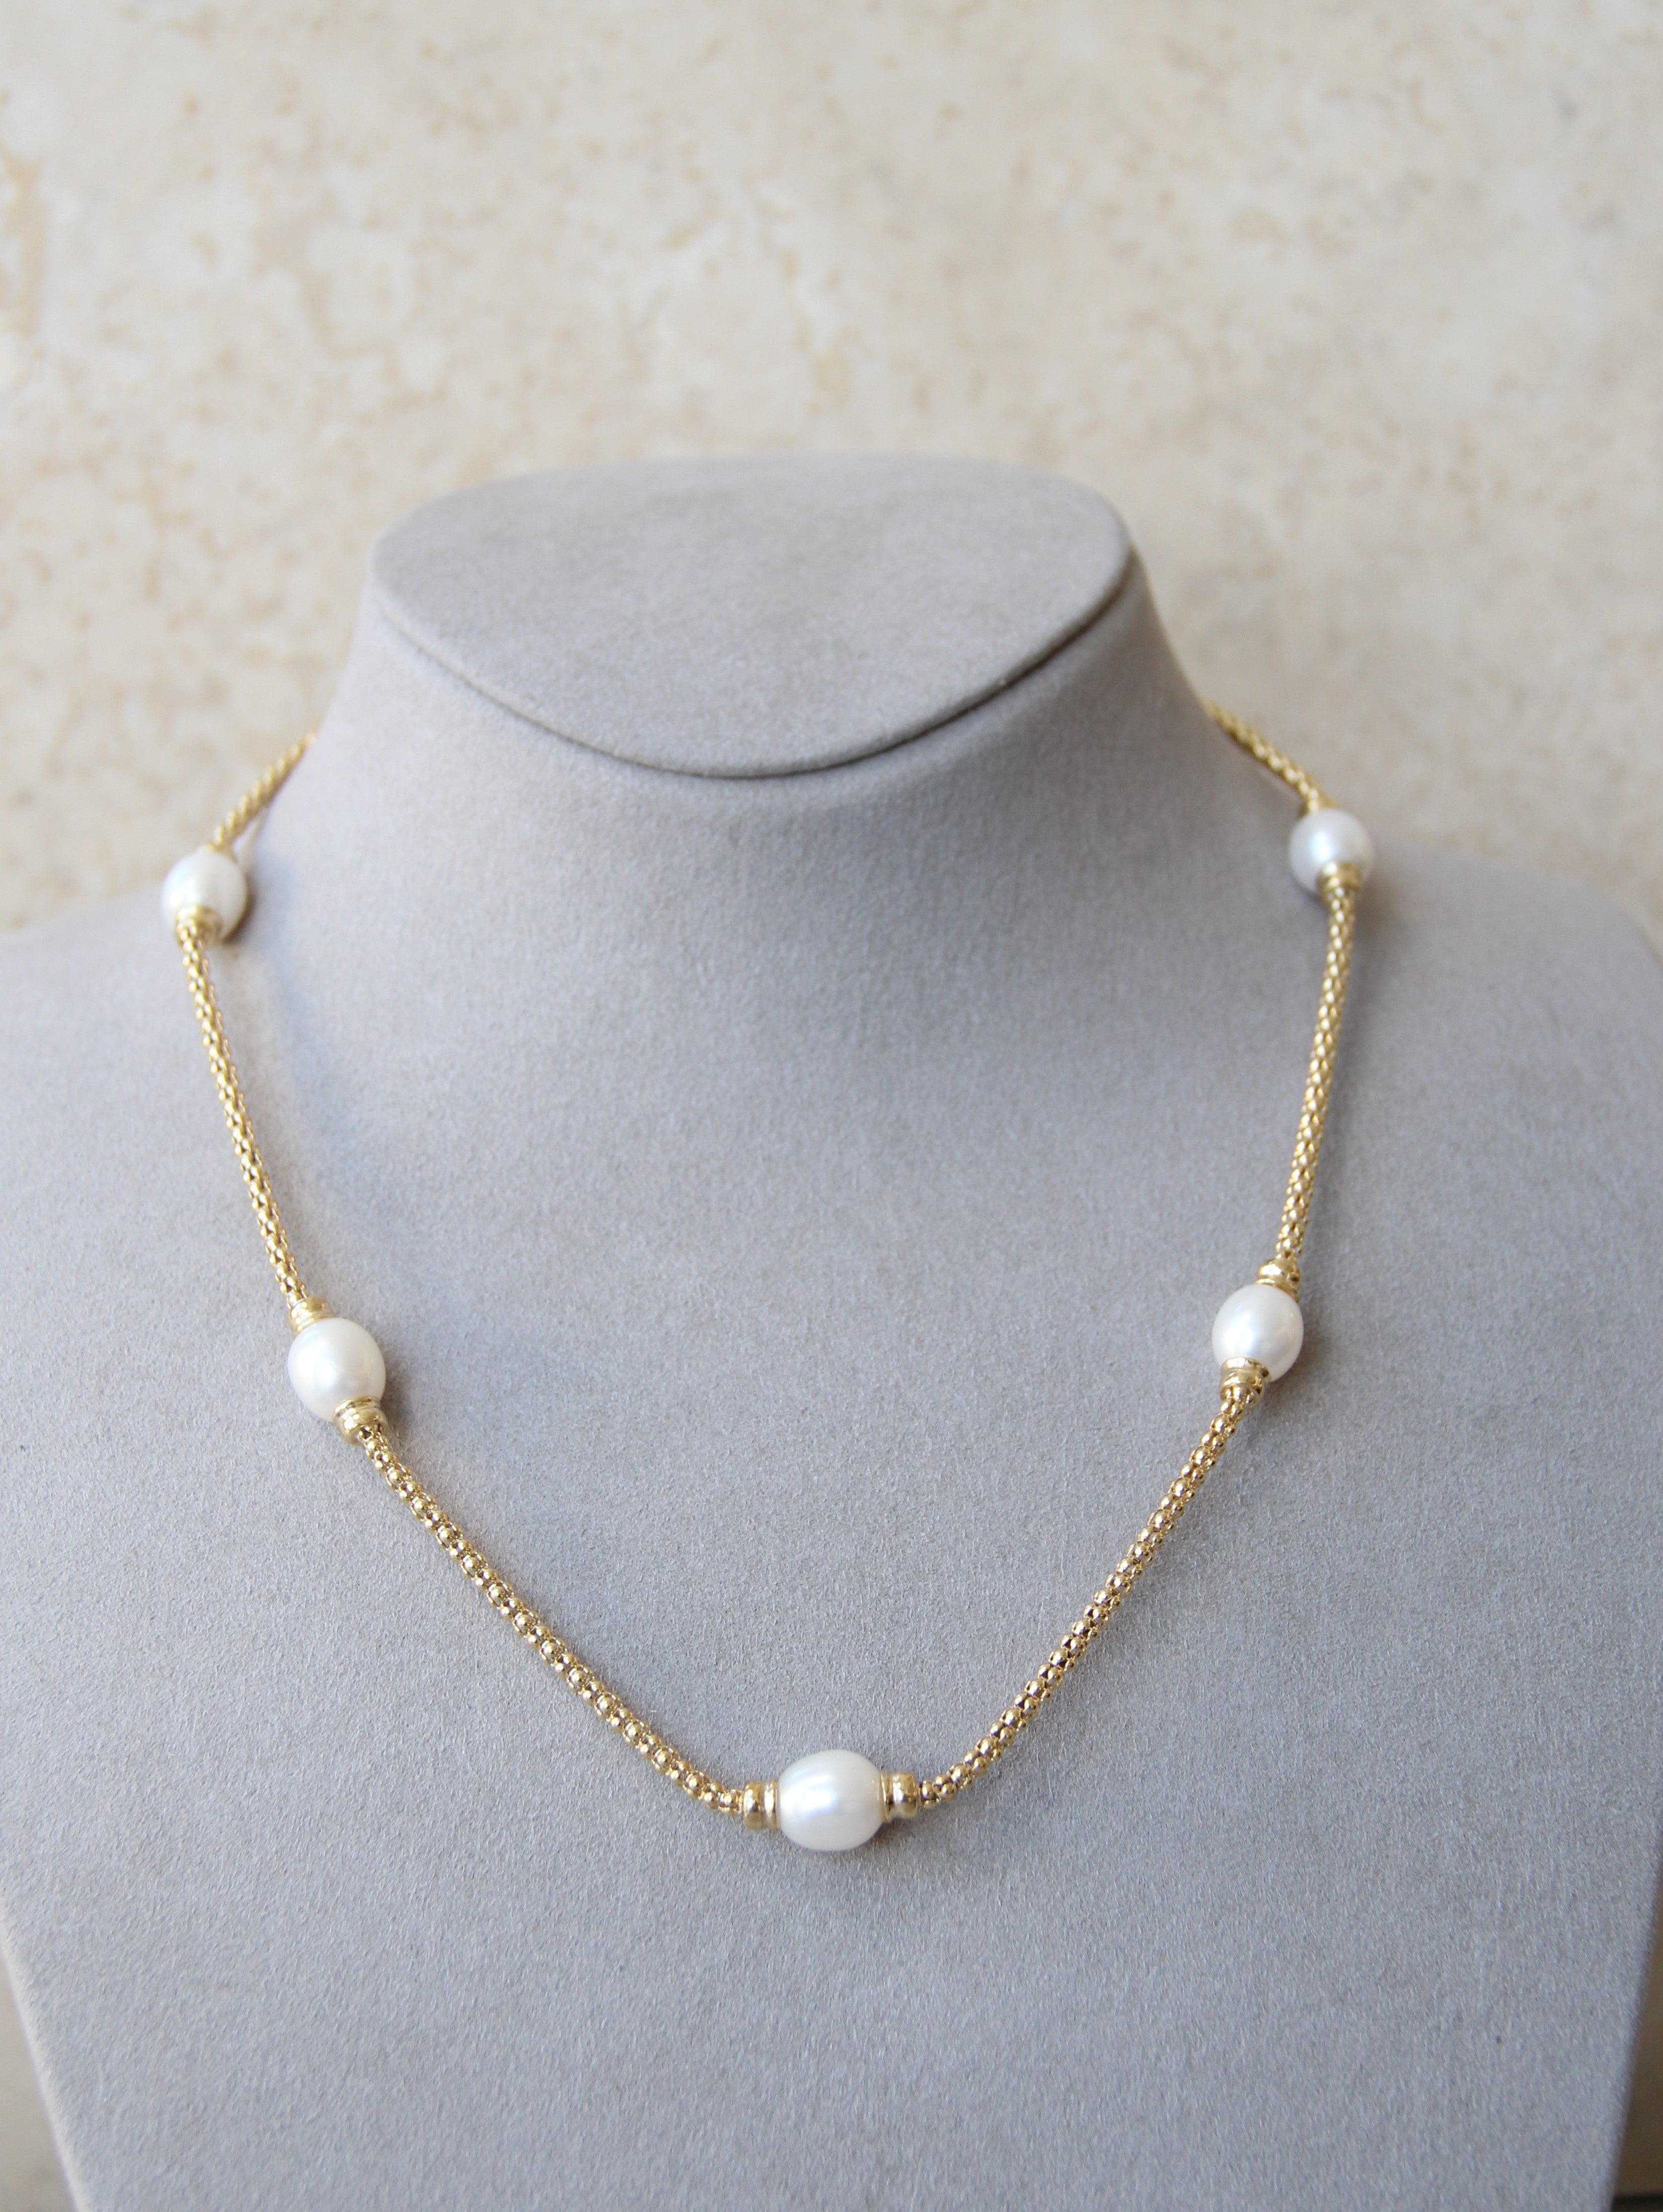 Silver 925 Necklace with Cultured Pearls